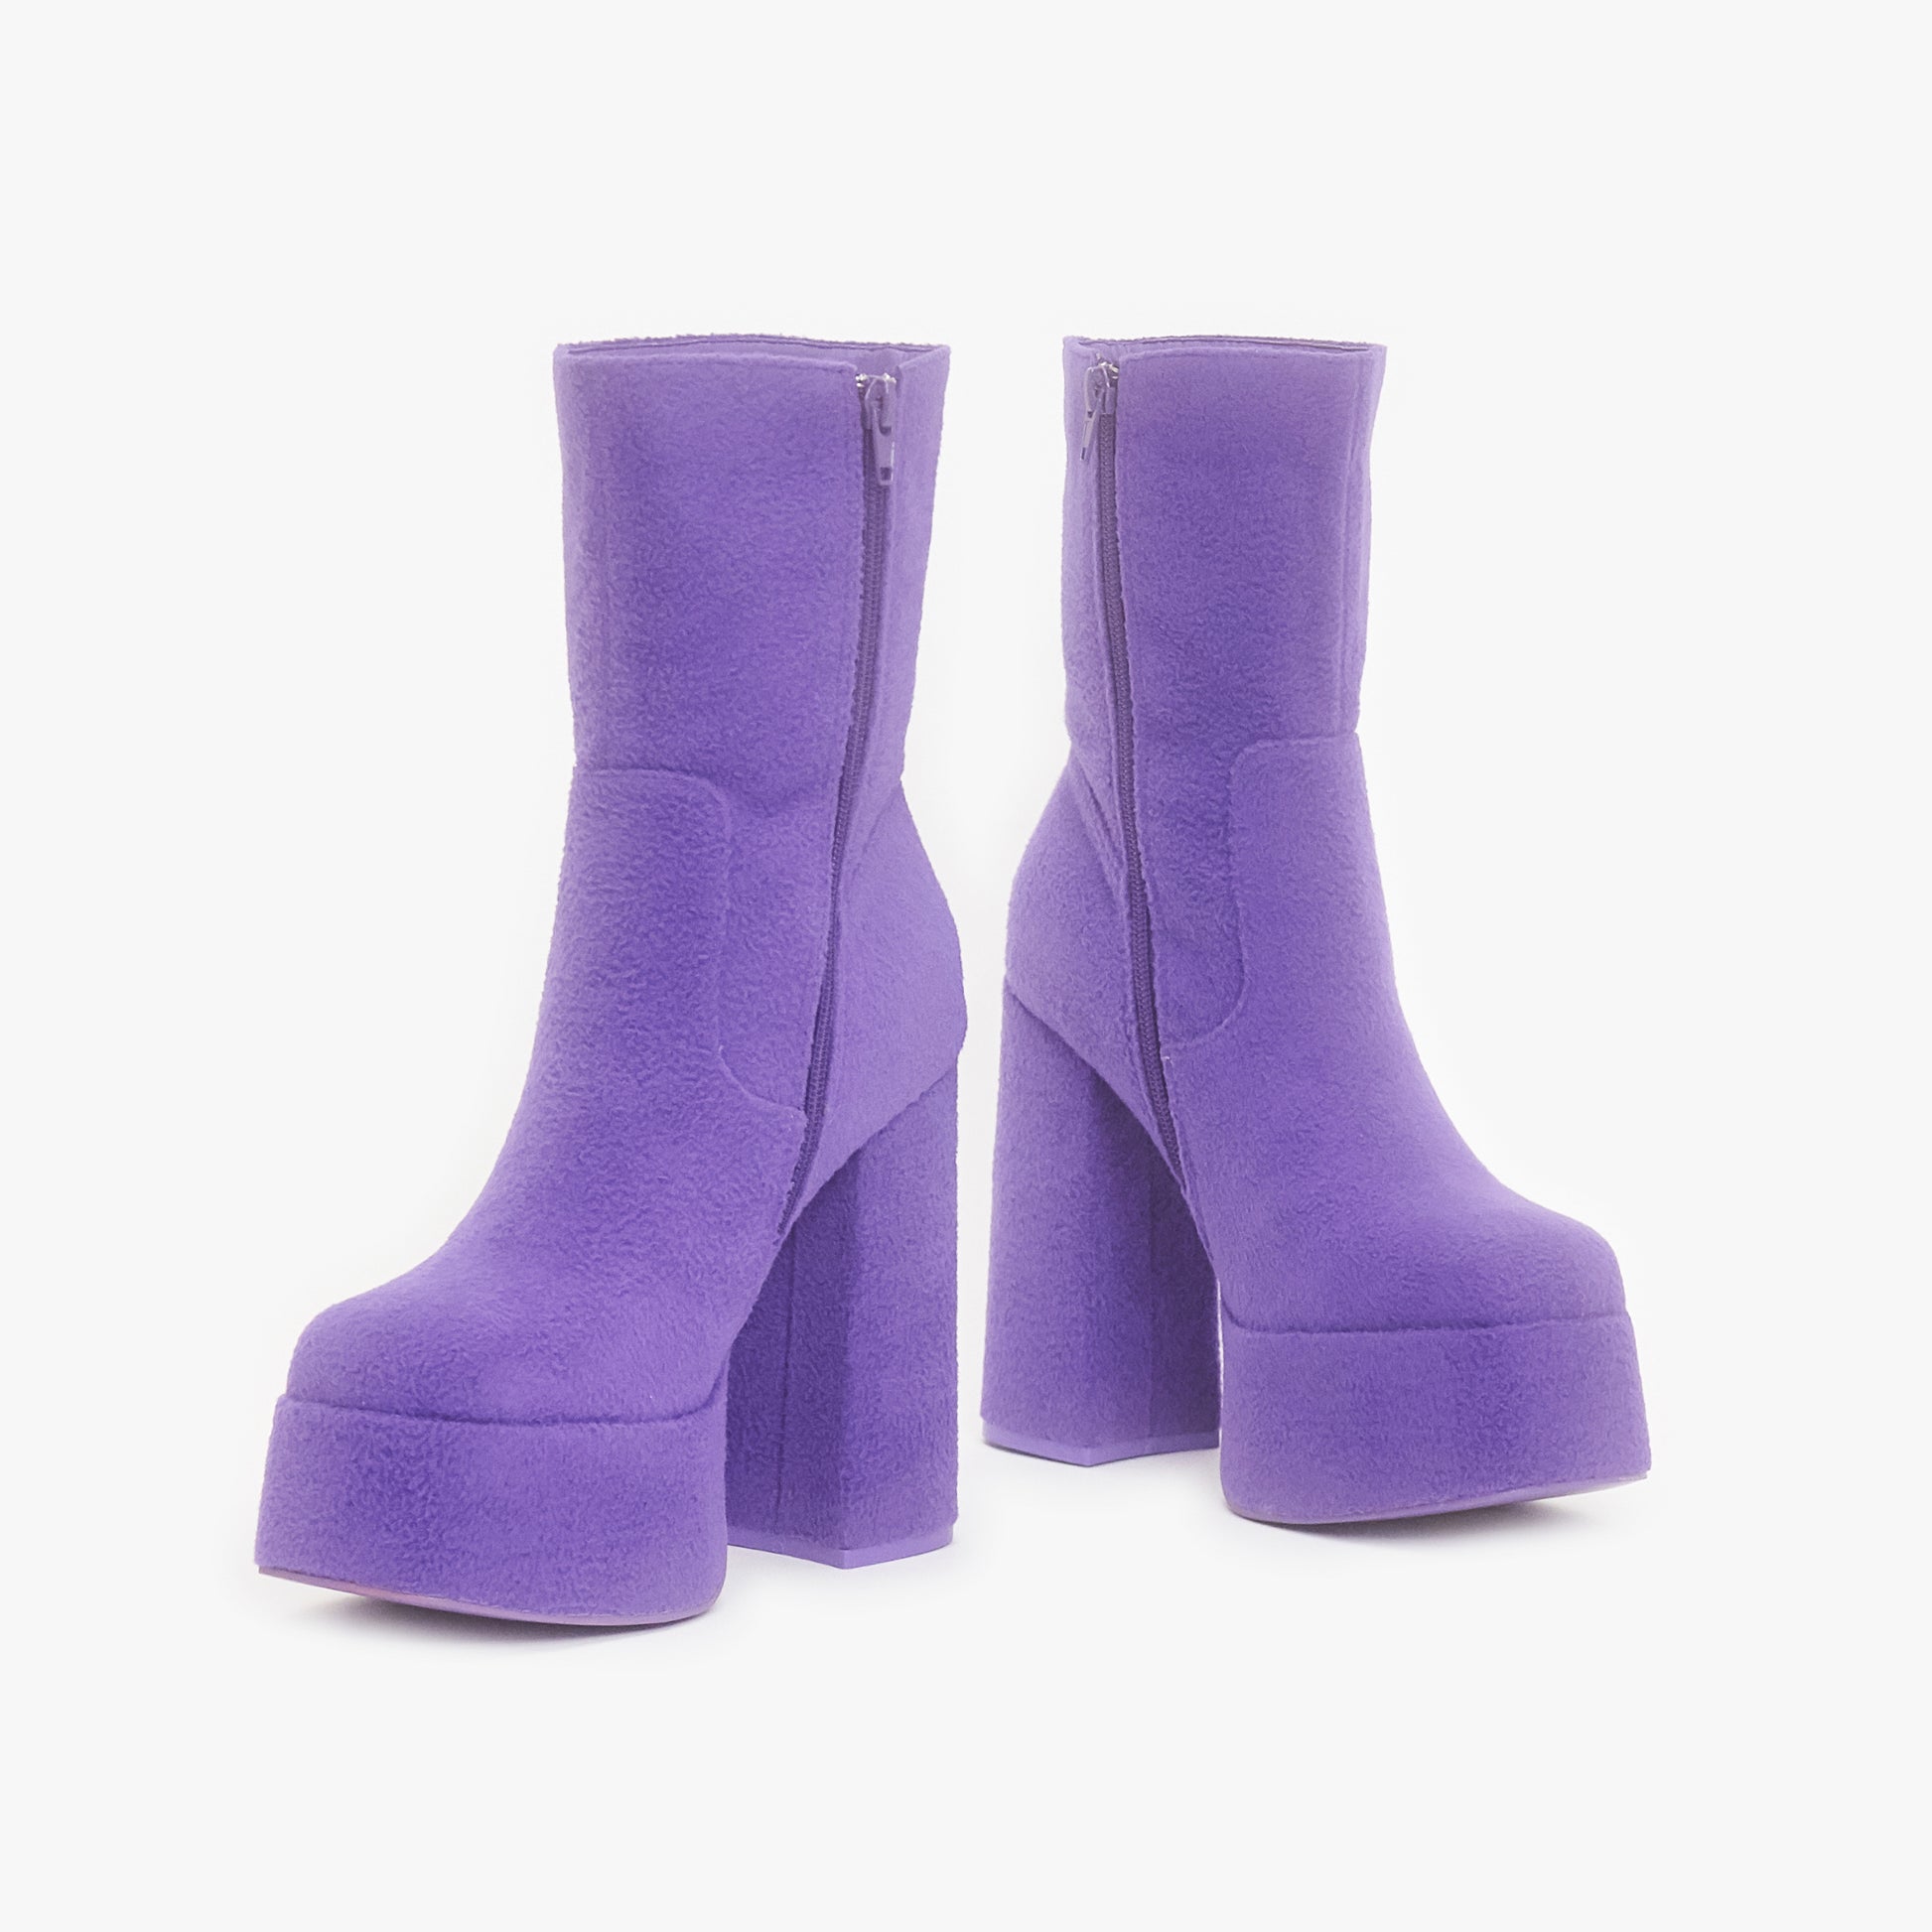 Tinky Winky Fluffy Platform Boots - Ankle Boots - KOI Footwear - Purple - Front Detail